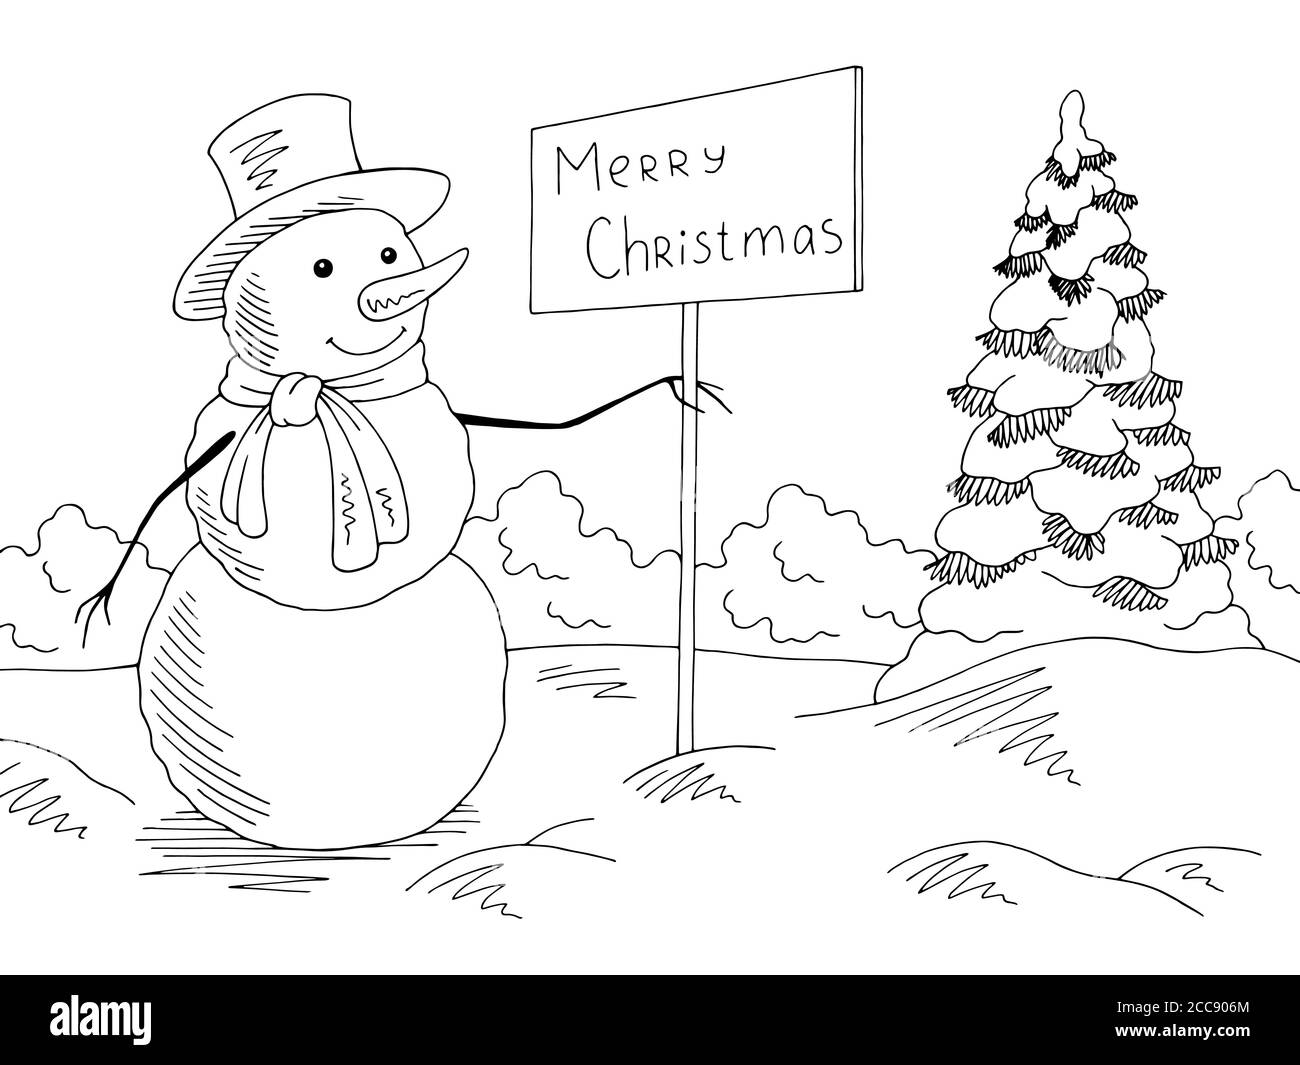 Snowman holding a greeting sign in winter park graphic black white landscape sketch illustration vector Stock Vector